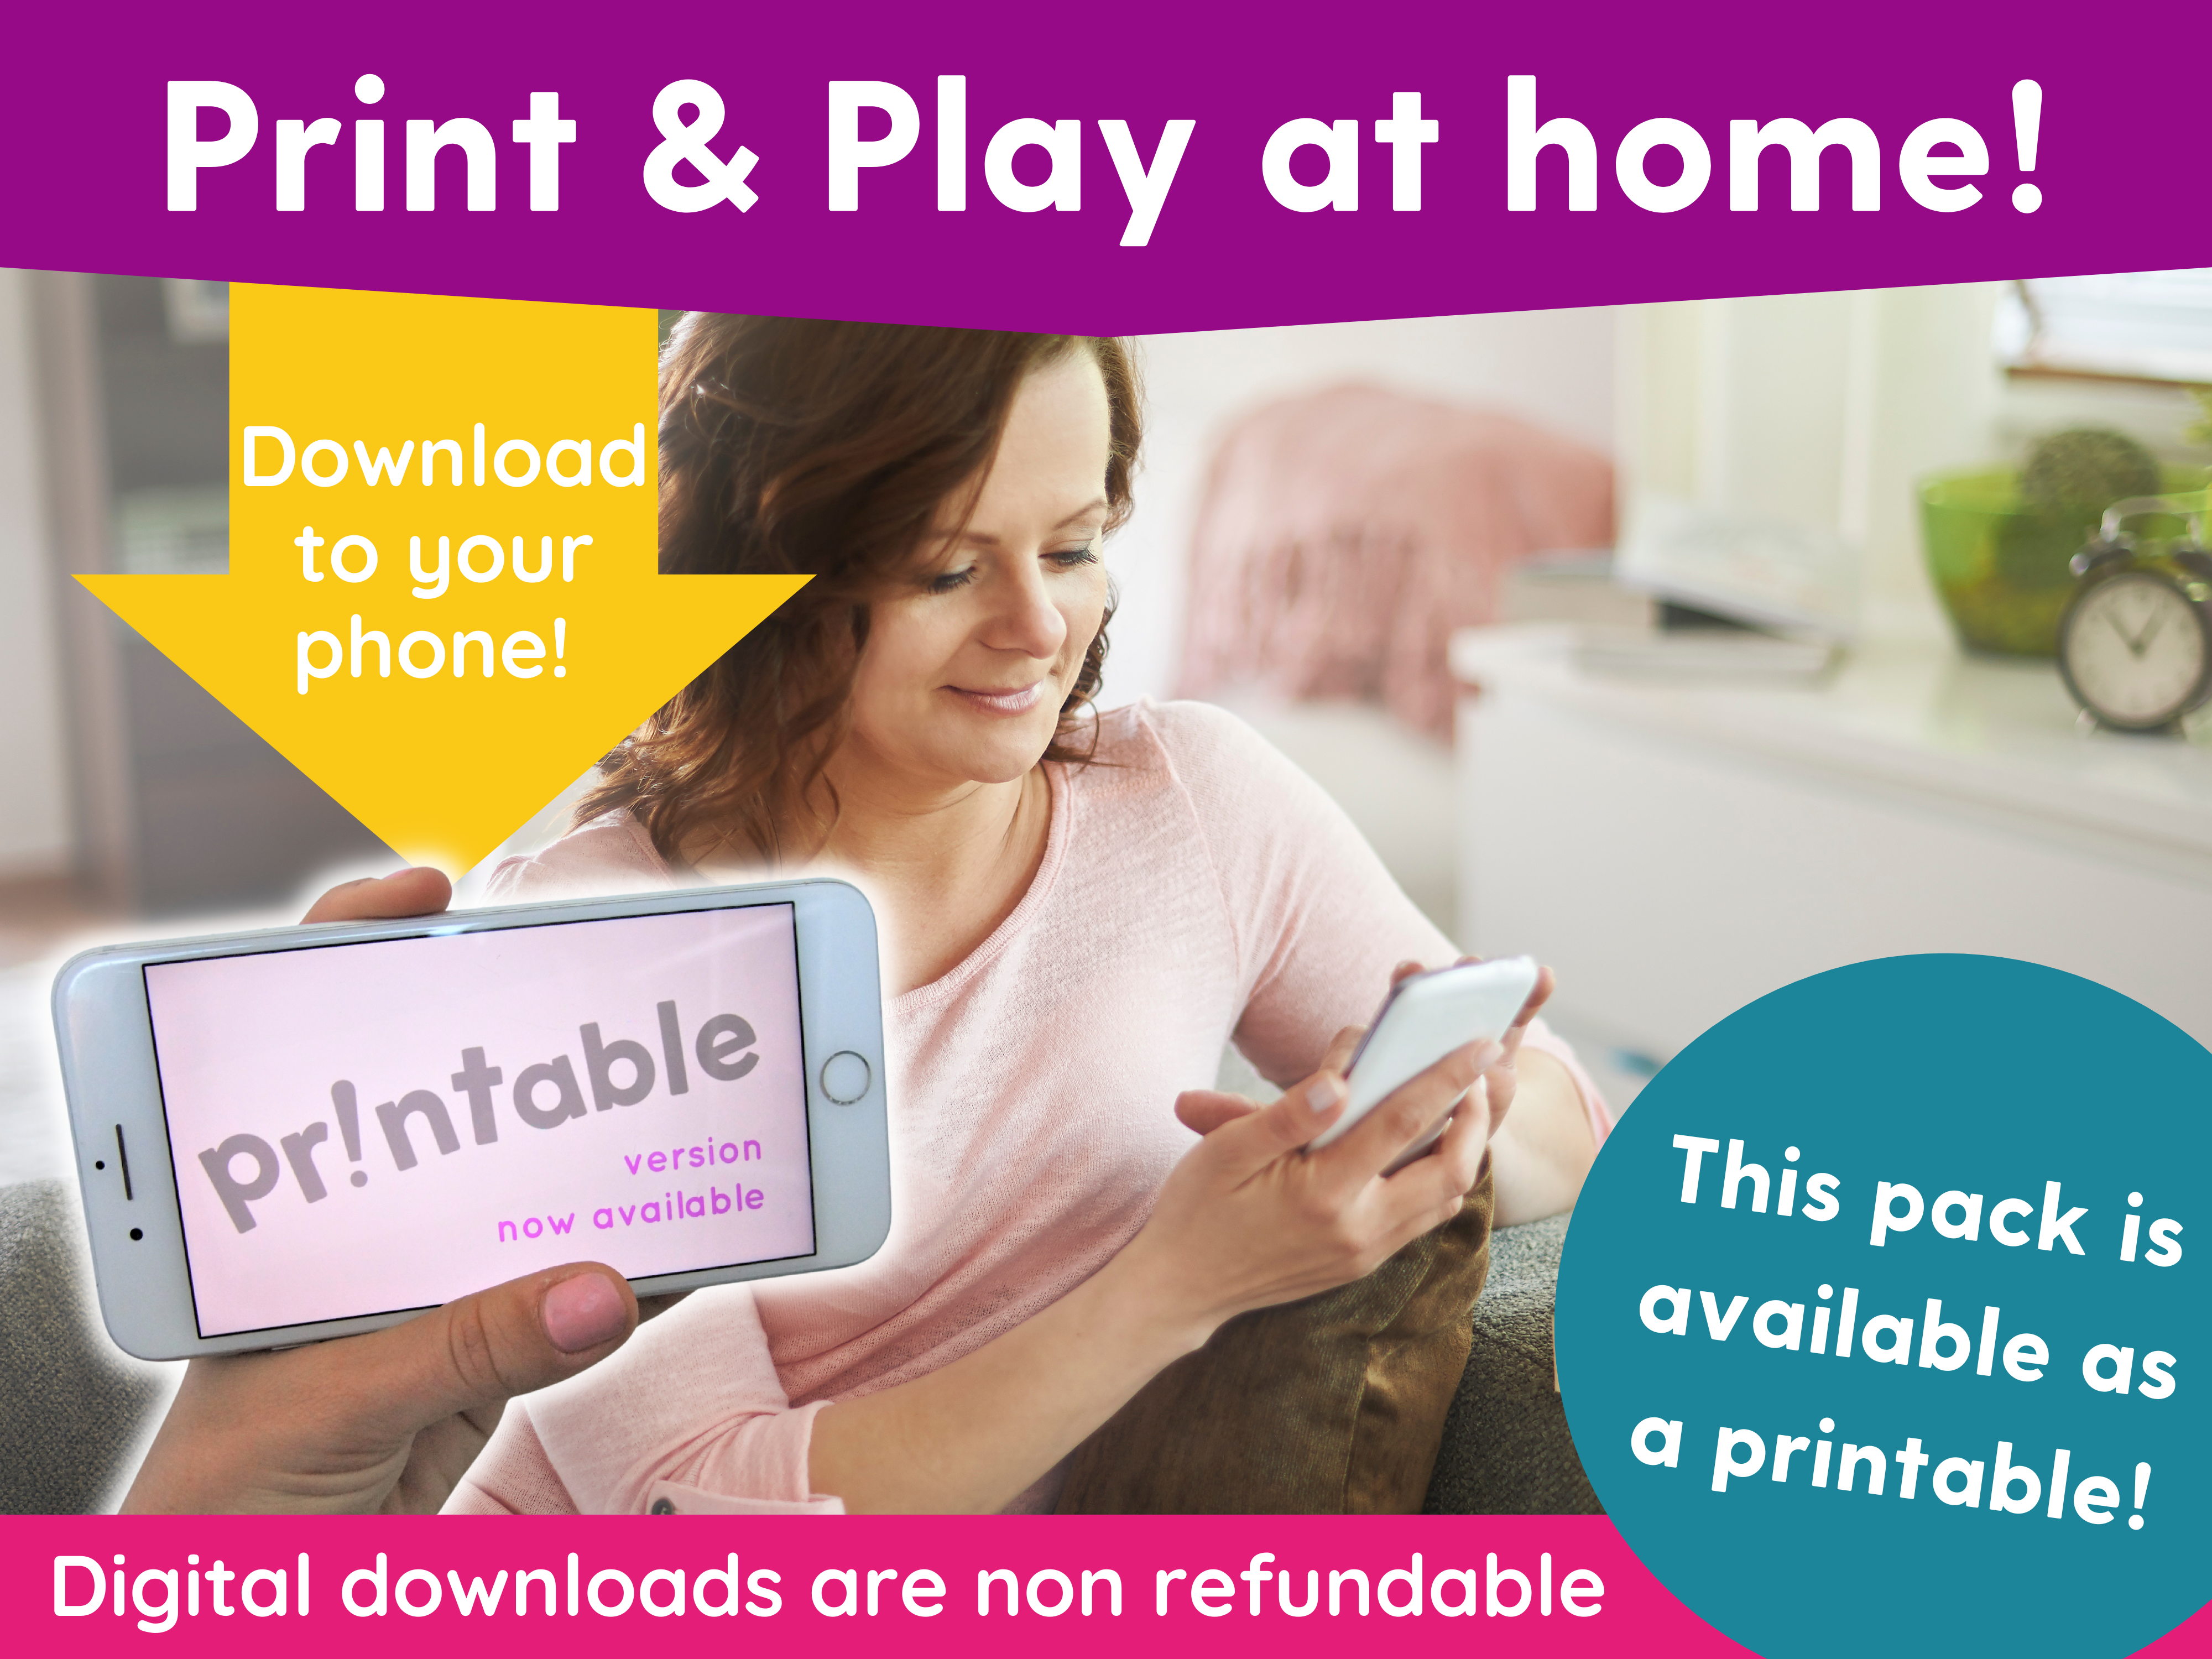 playPROMPTS PLUS printable activity cards for kids aged 5+